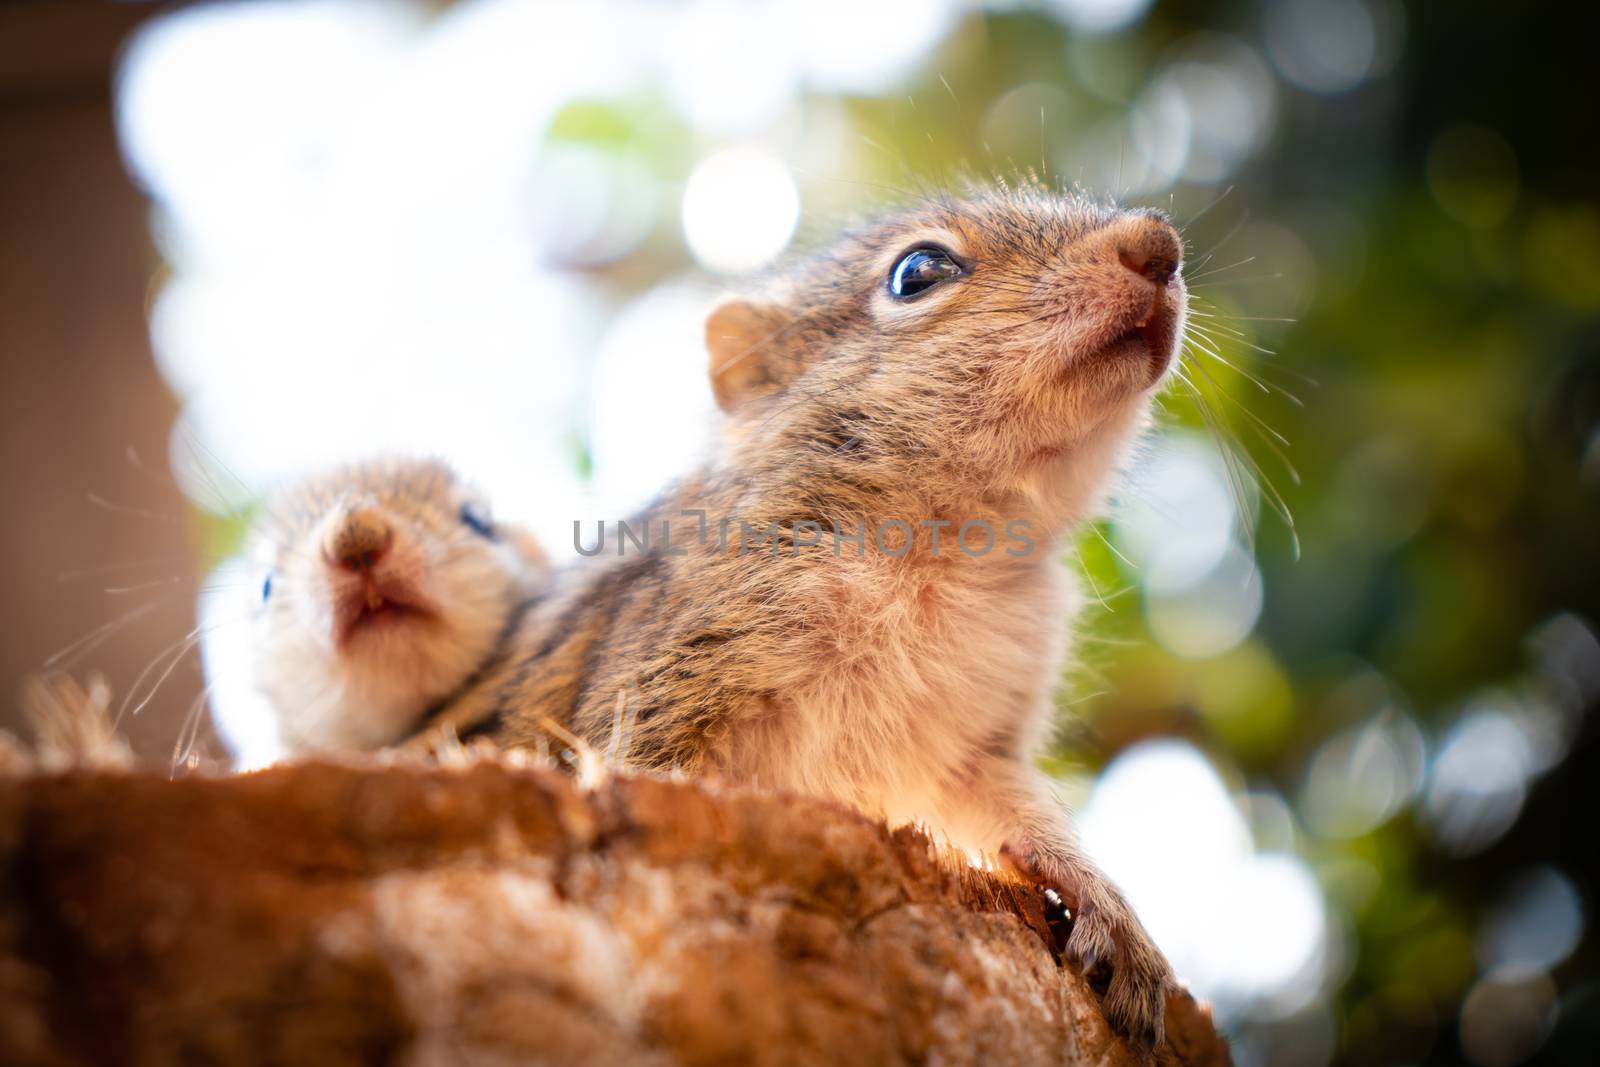 Abandoned cute baby squirrels looking out for their mother by nilanka